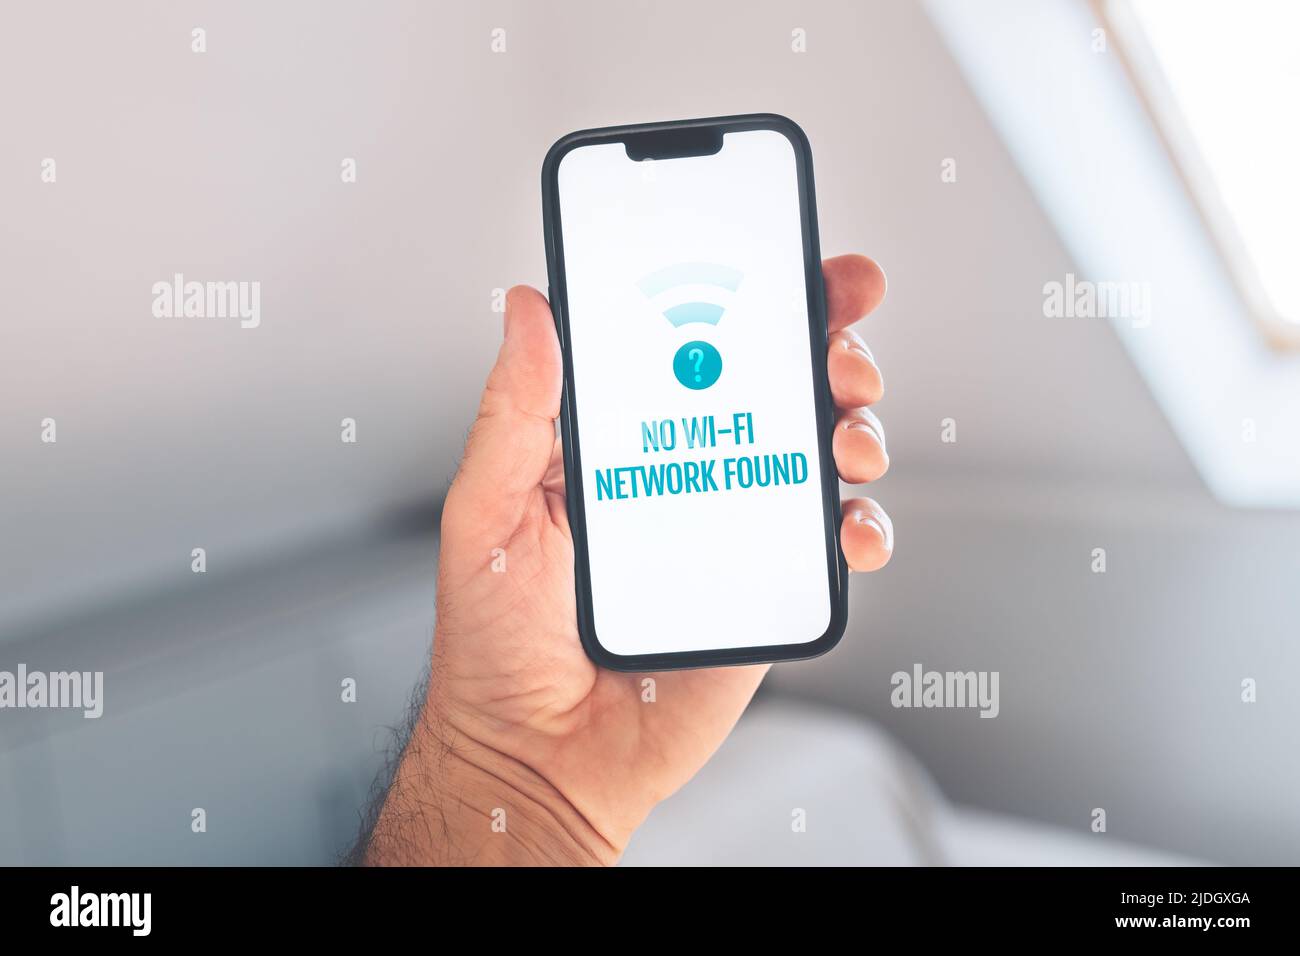 No Wi-Fi Network found message on smartphone device, selective focus Stock Photo